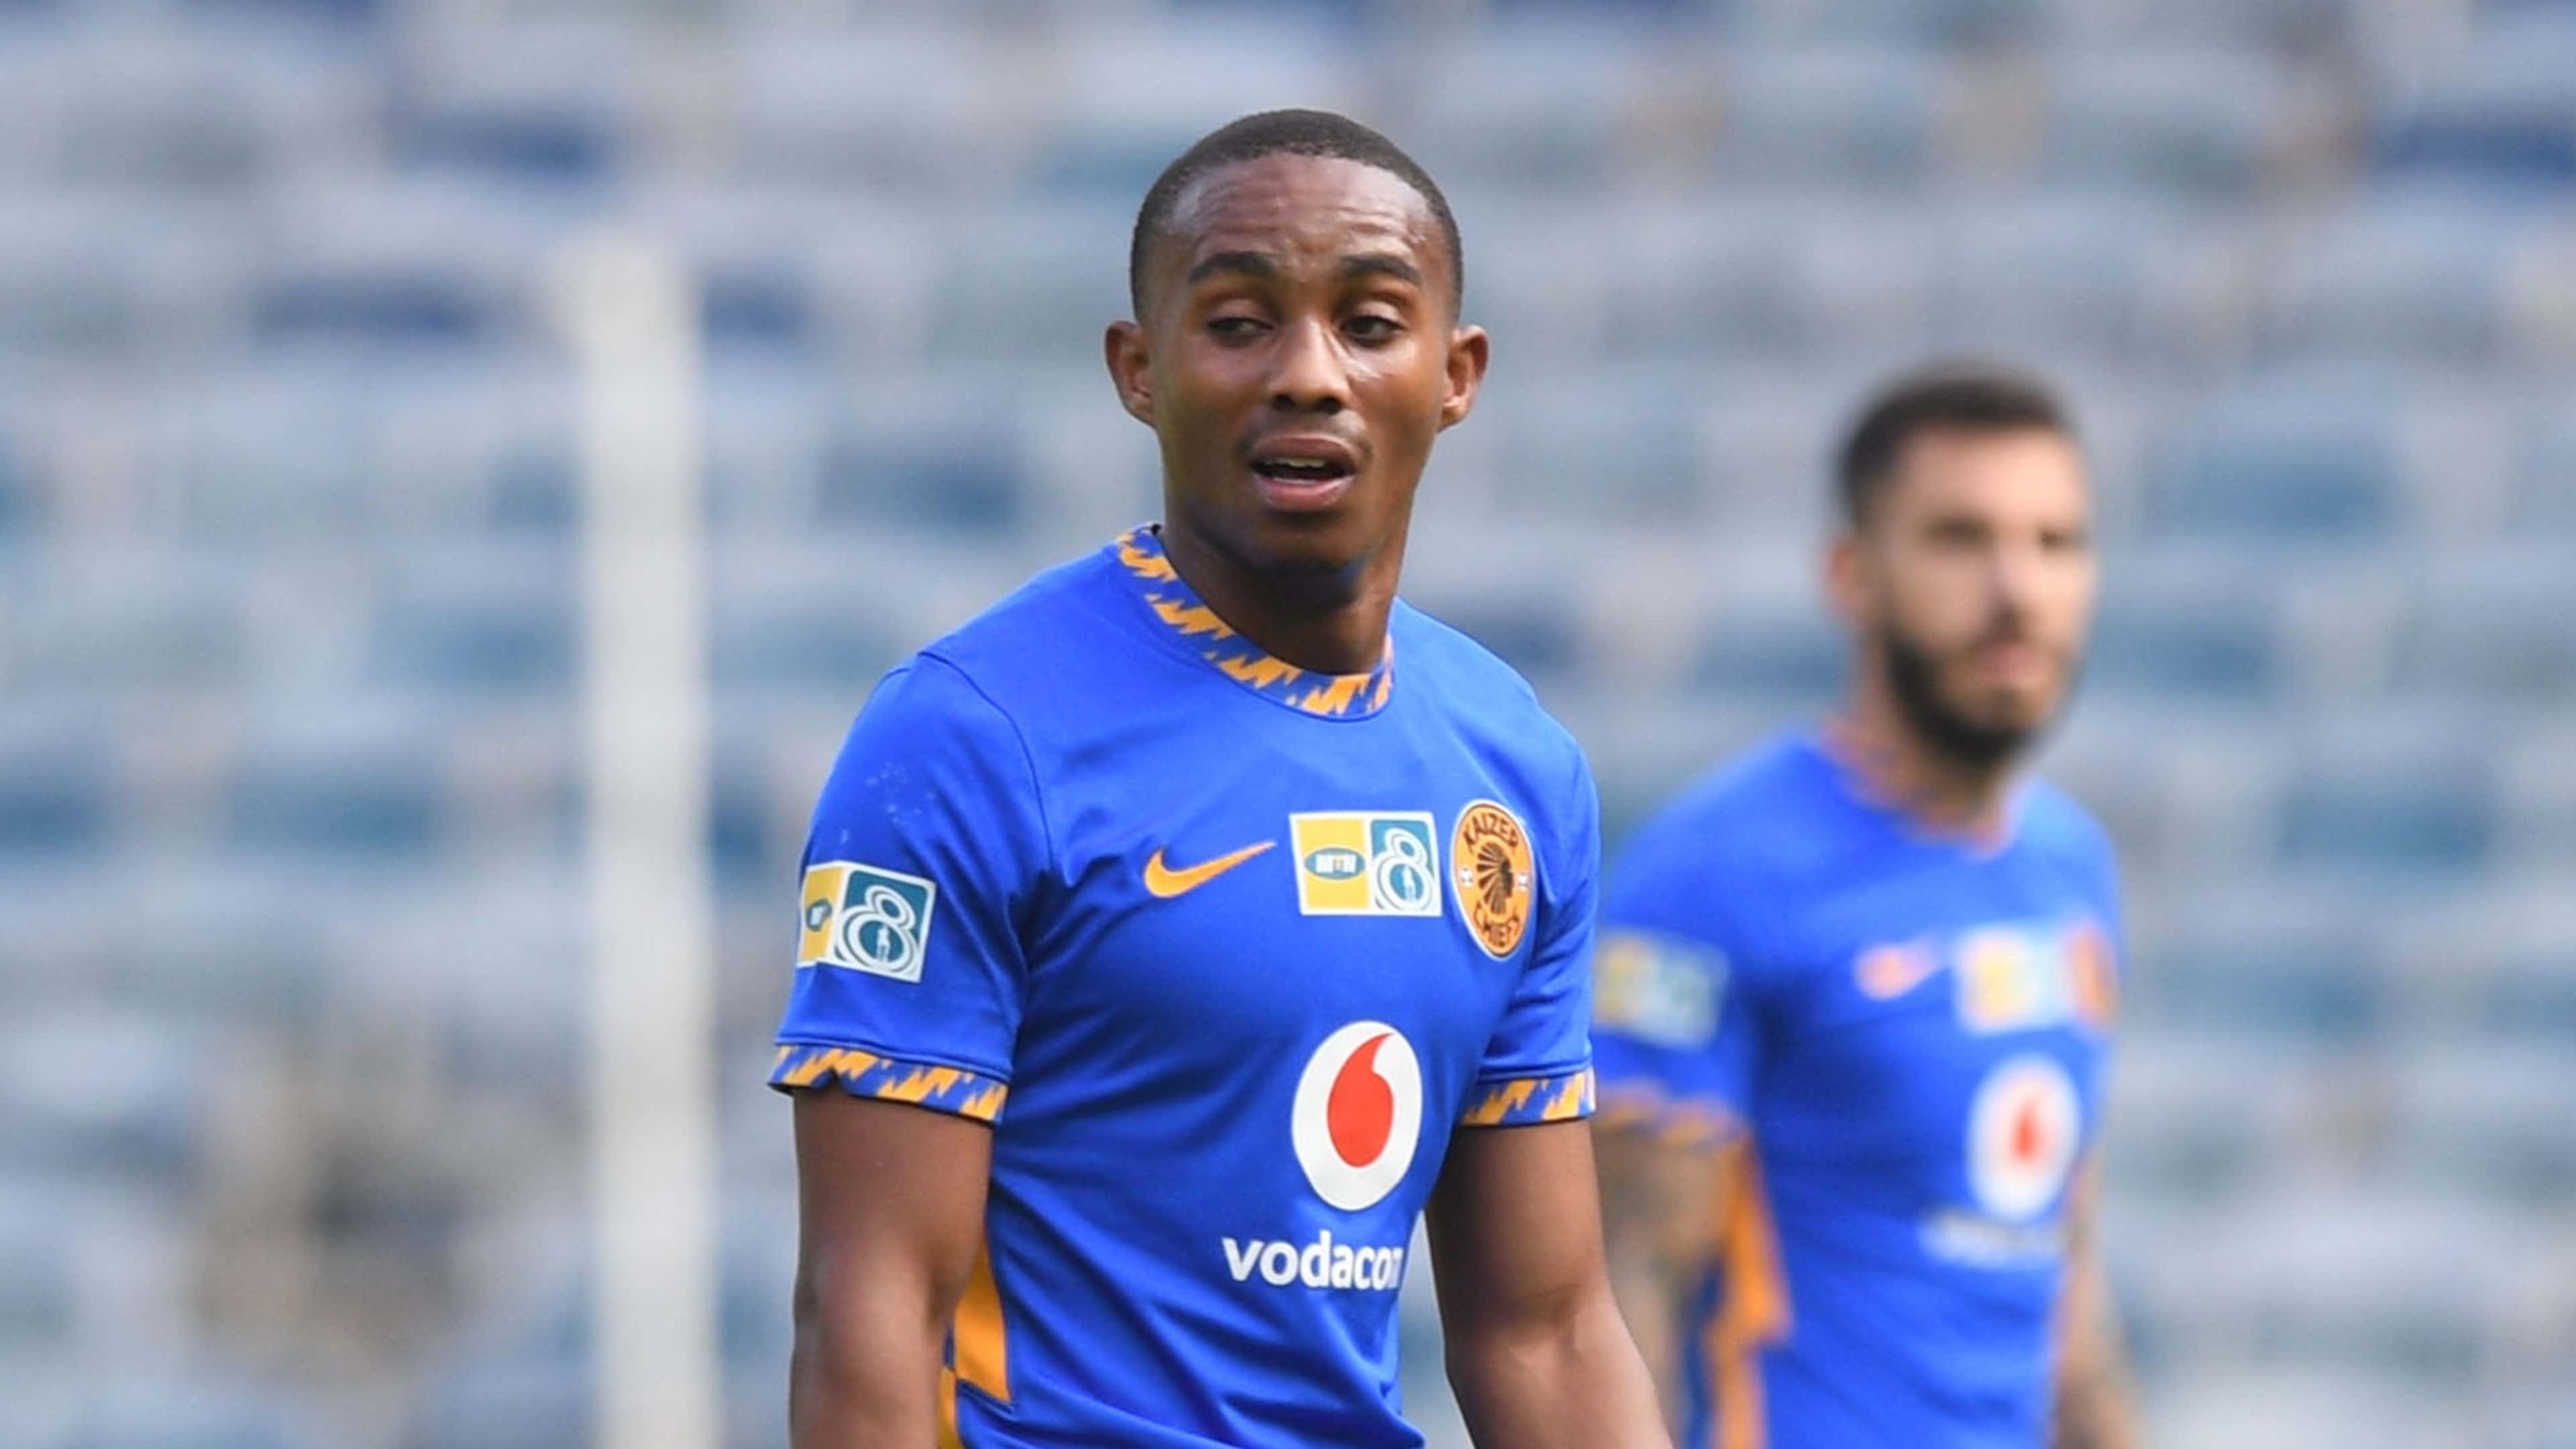 Blom leaves Kaizer Chiefs for St Louis SC: What awaits him in MLS